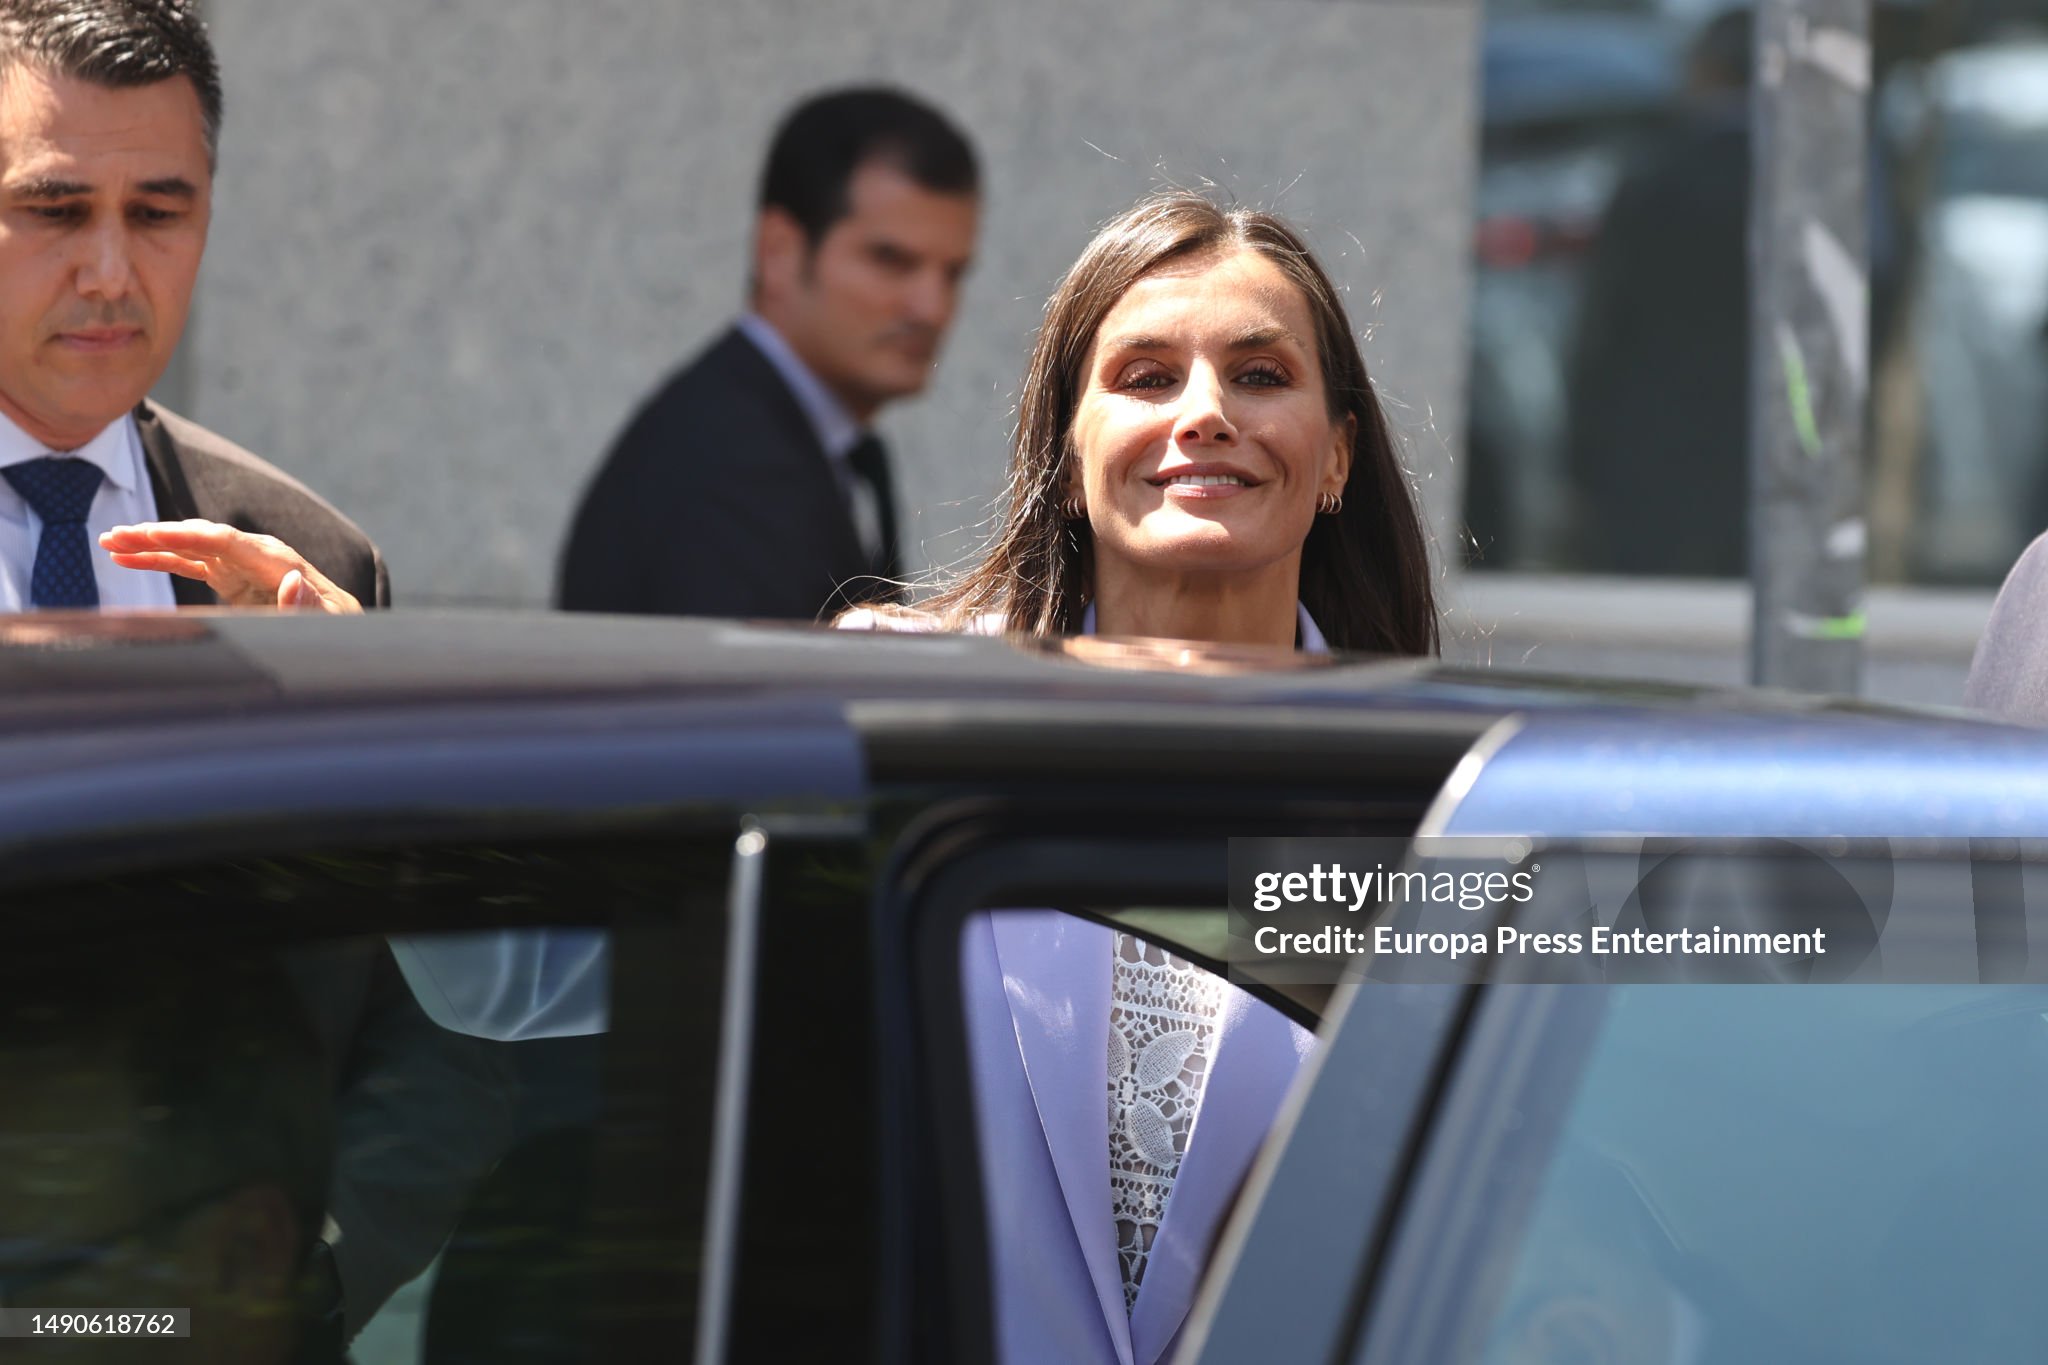 the-queen-presides-over-the-opening-ceremony-of-the-xxii-congreso-salud-mental-espa%C3%B1a.jpg